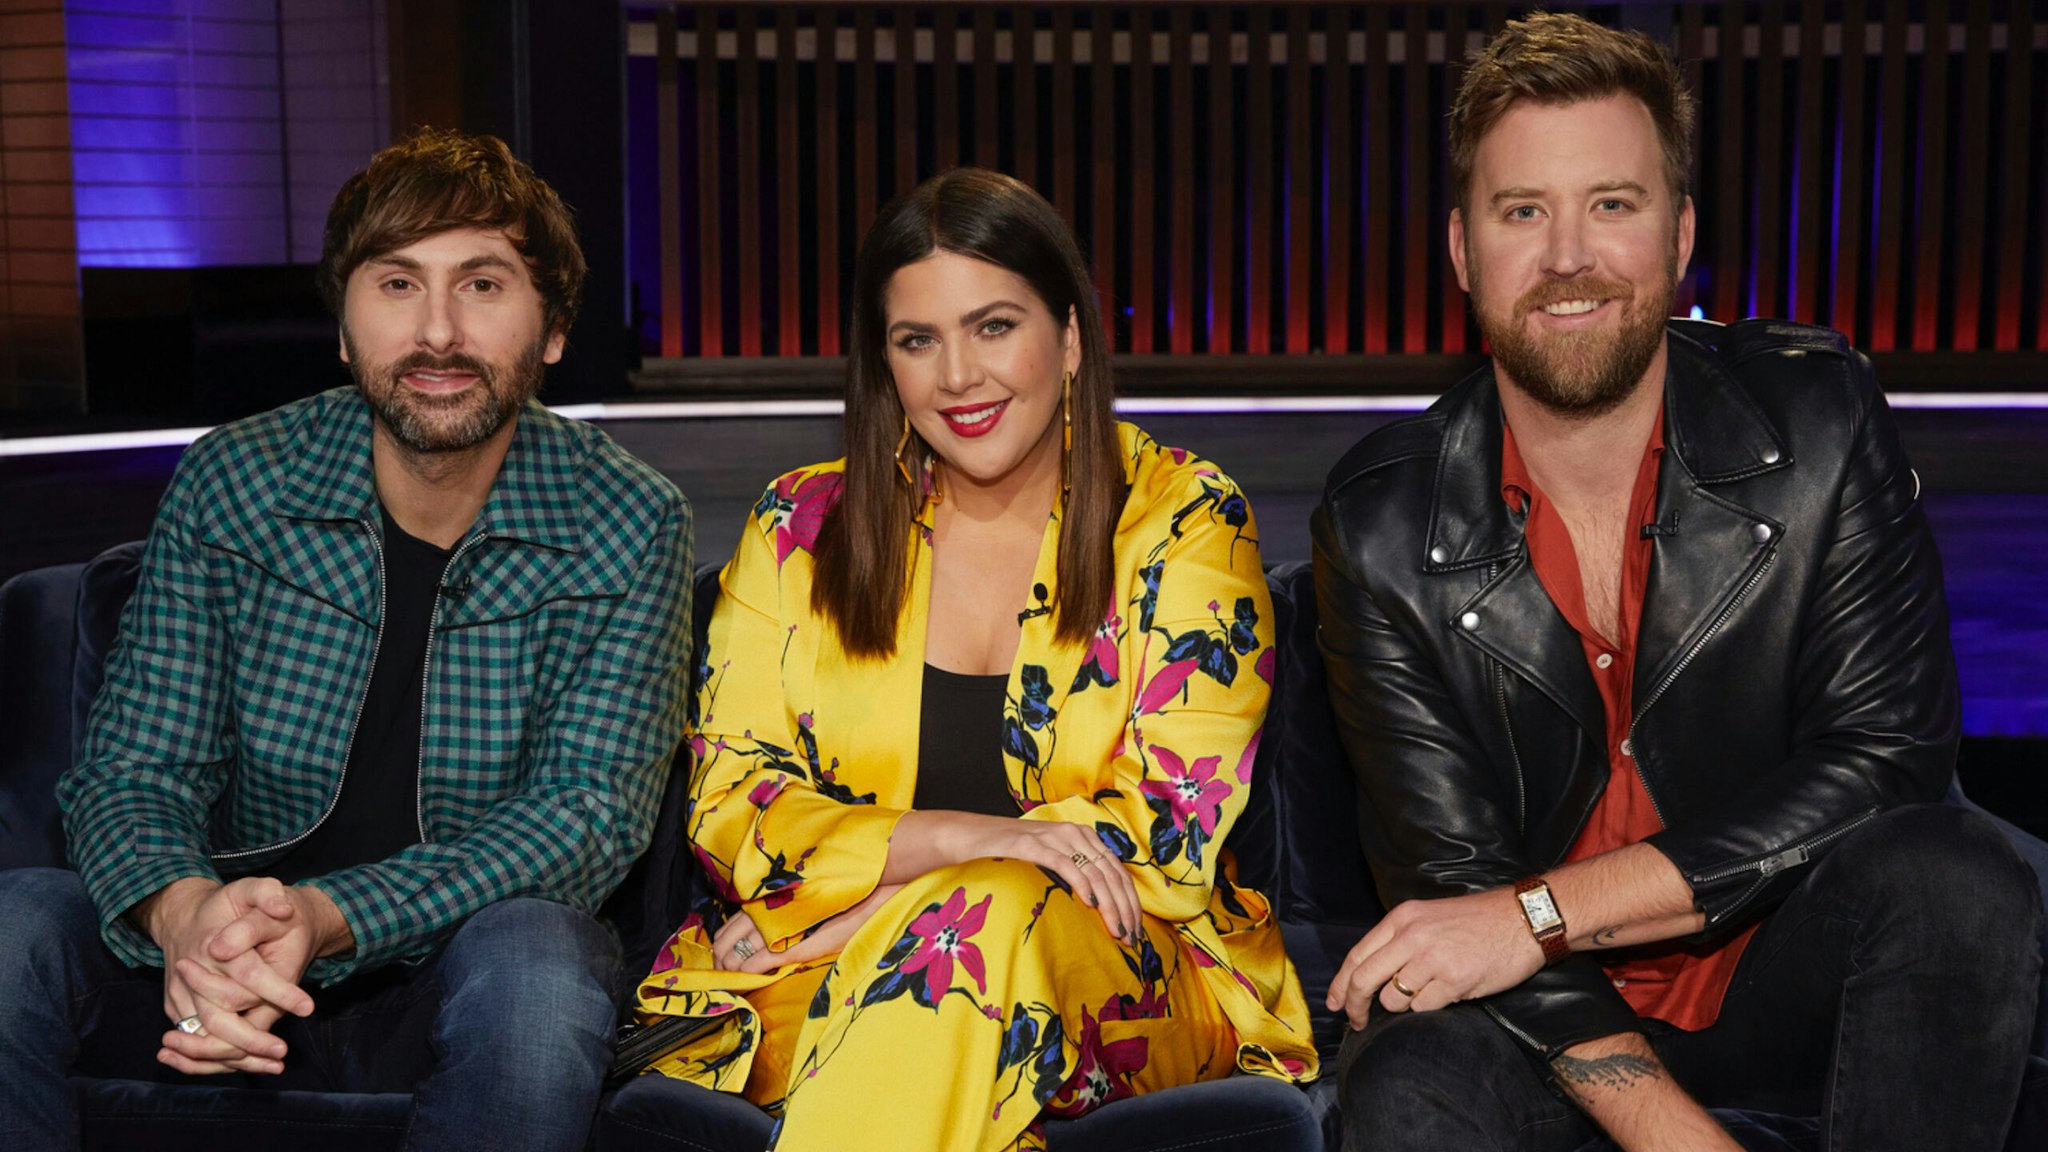 Pictured: (l-r) Dave Haywood, Hillary Scott, Charles Kelley of Lady Antebellum.